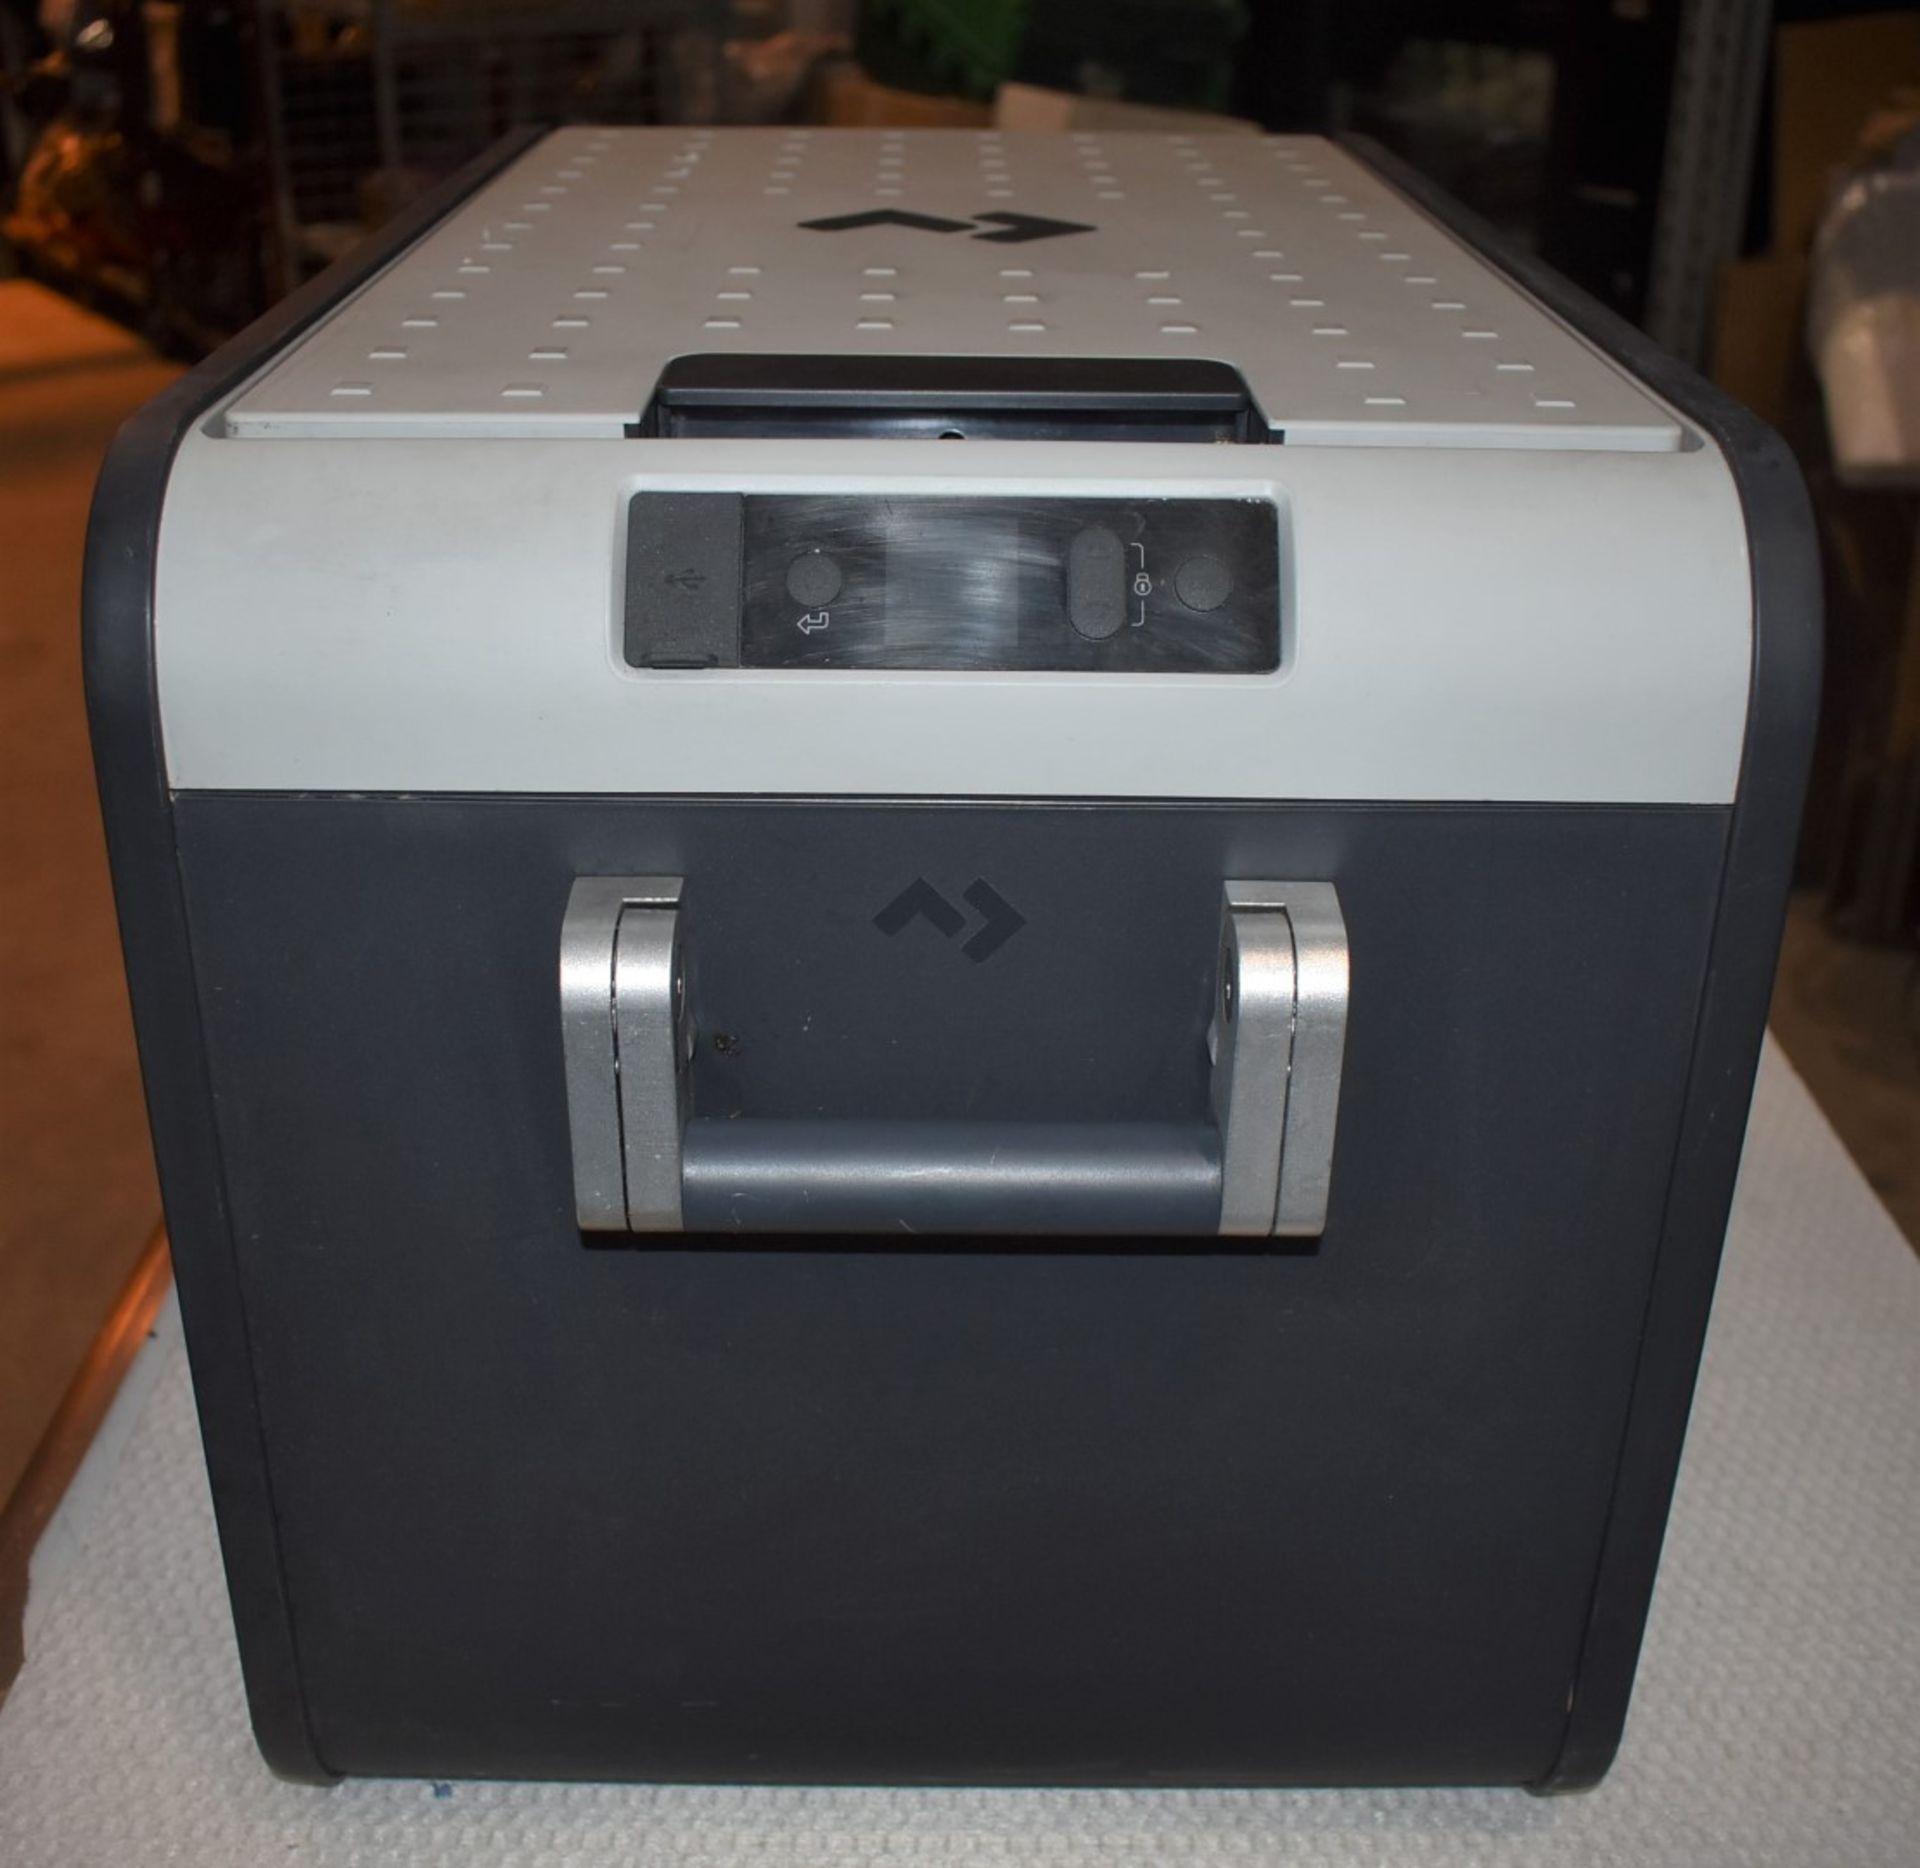 1 x Dometic CFX3 35 Portable 32l Compressor Cooler and Freezer - Perfect For Cooling The Christmas - Image 4 of 11